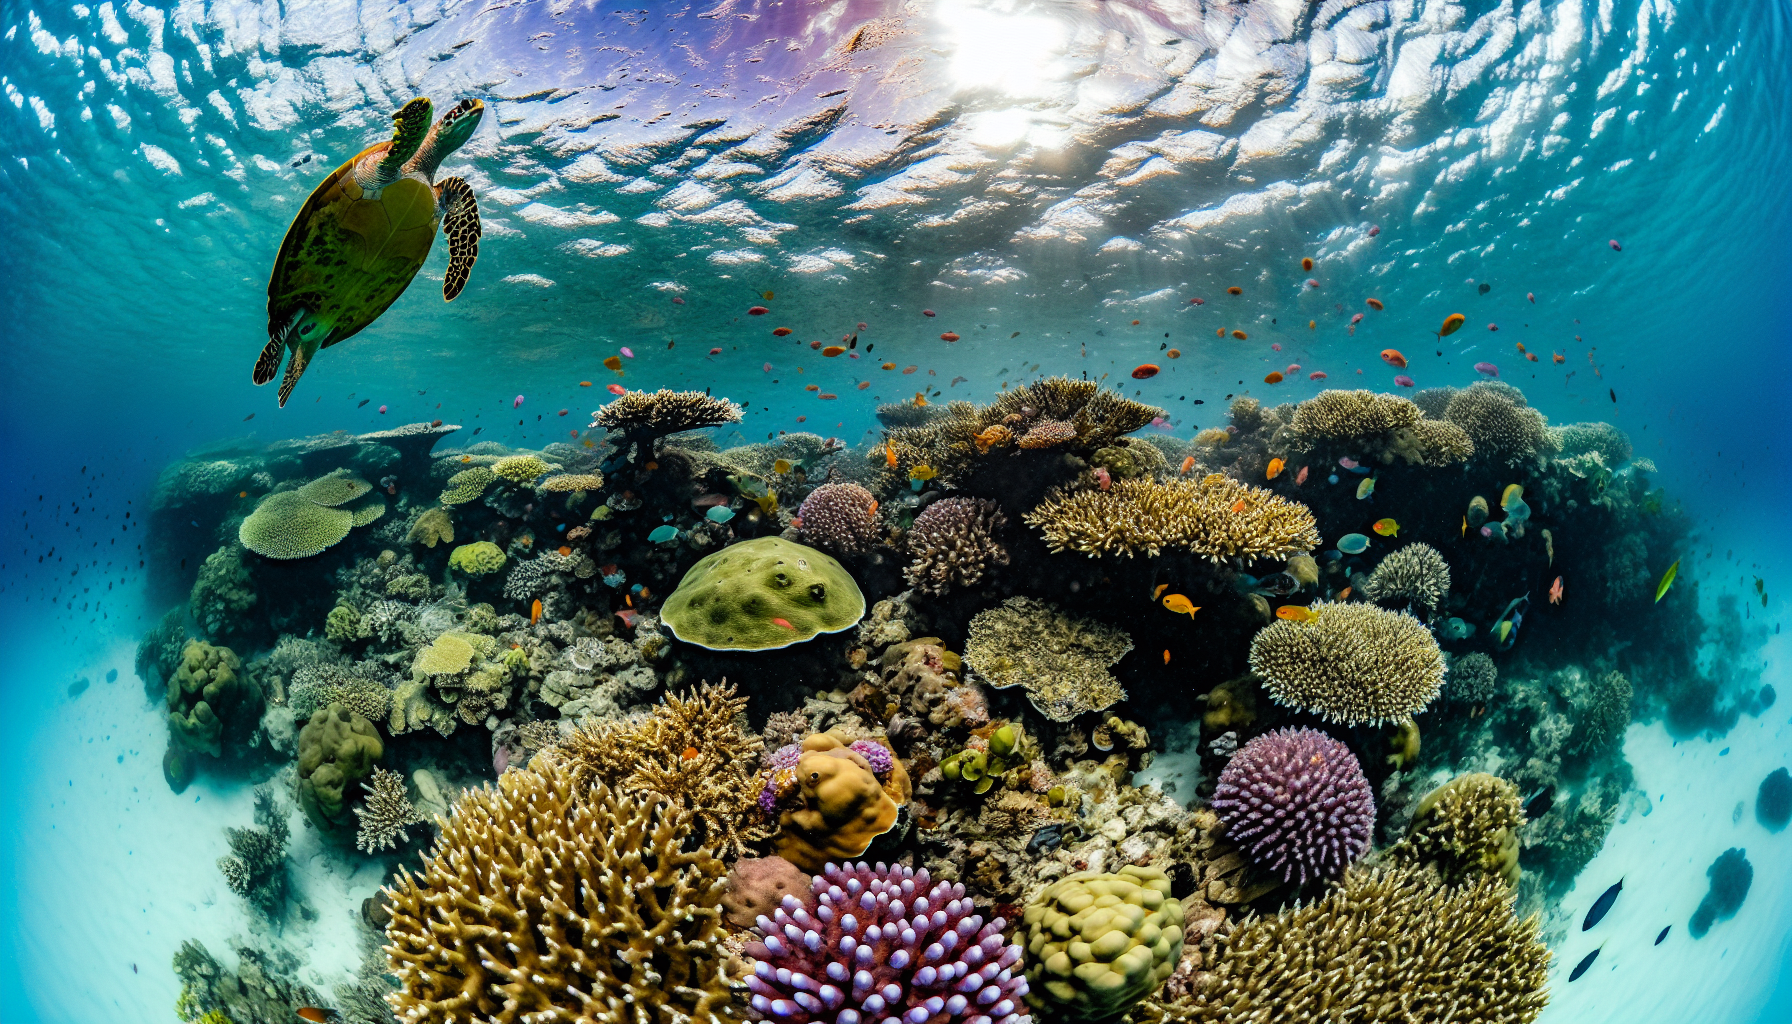 Underwater view of the Great Barrier Reef